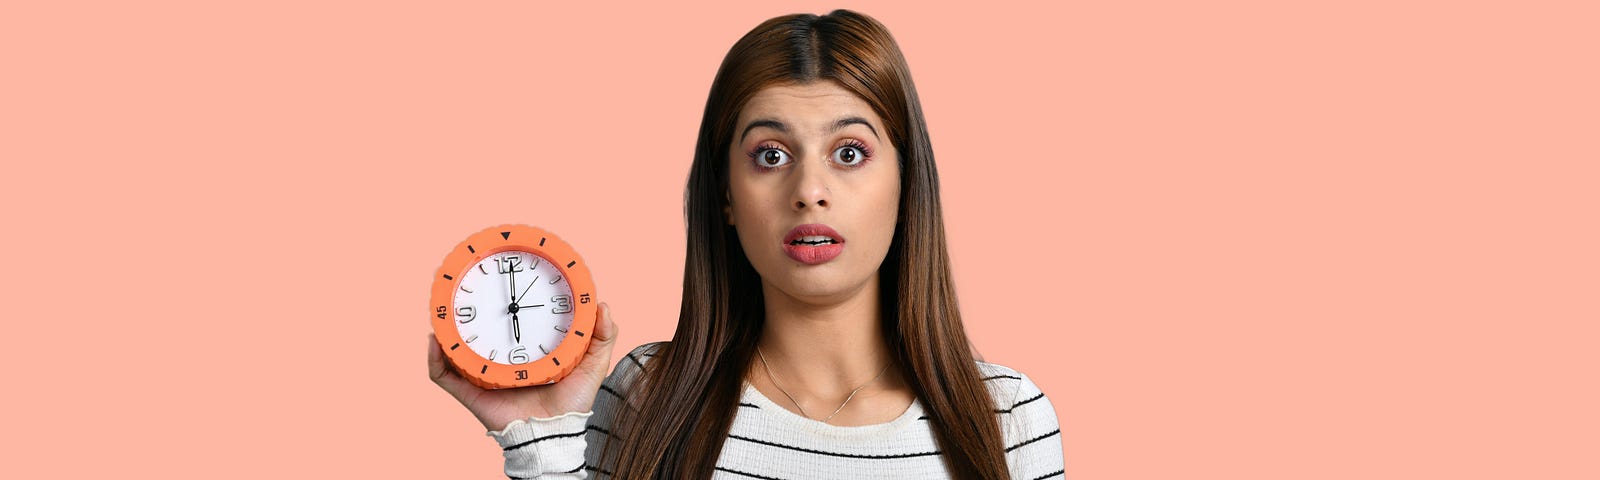 Lady holding a clock timer in her hand. She has long brown hair and is wearing a long-sleeved white stripey top.